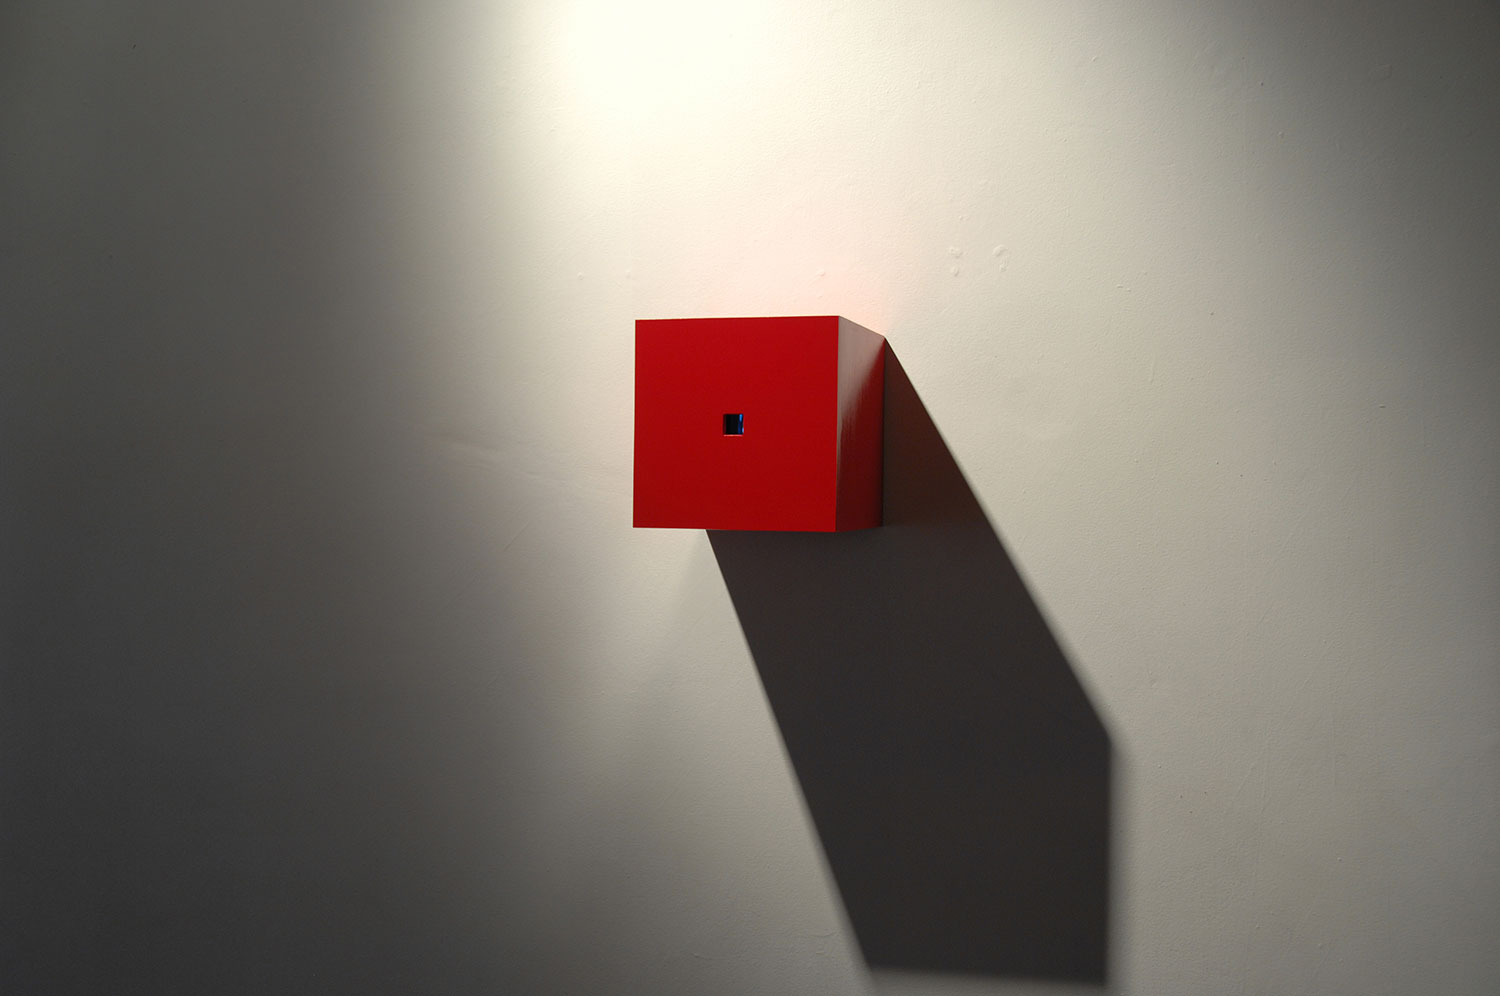 Existential Dilemma, 2003, video installation, two-channel, red box 11 x 11 x 11.5<br><br>Go to menu, click VIDEOS, to watch excerpts<br><br>Peek inside the box to find us continuously flipping inside a box that imposes laws of constraint.